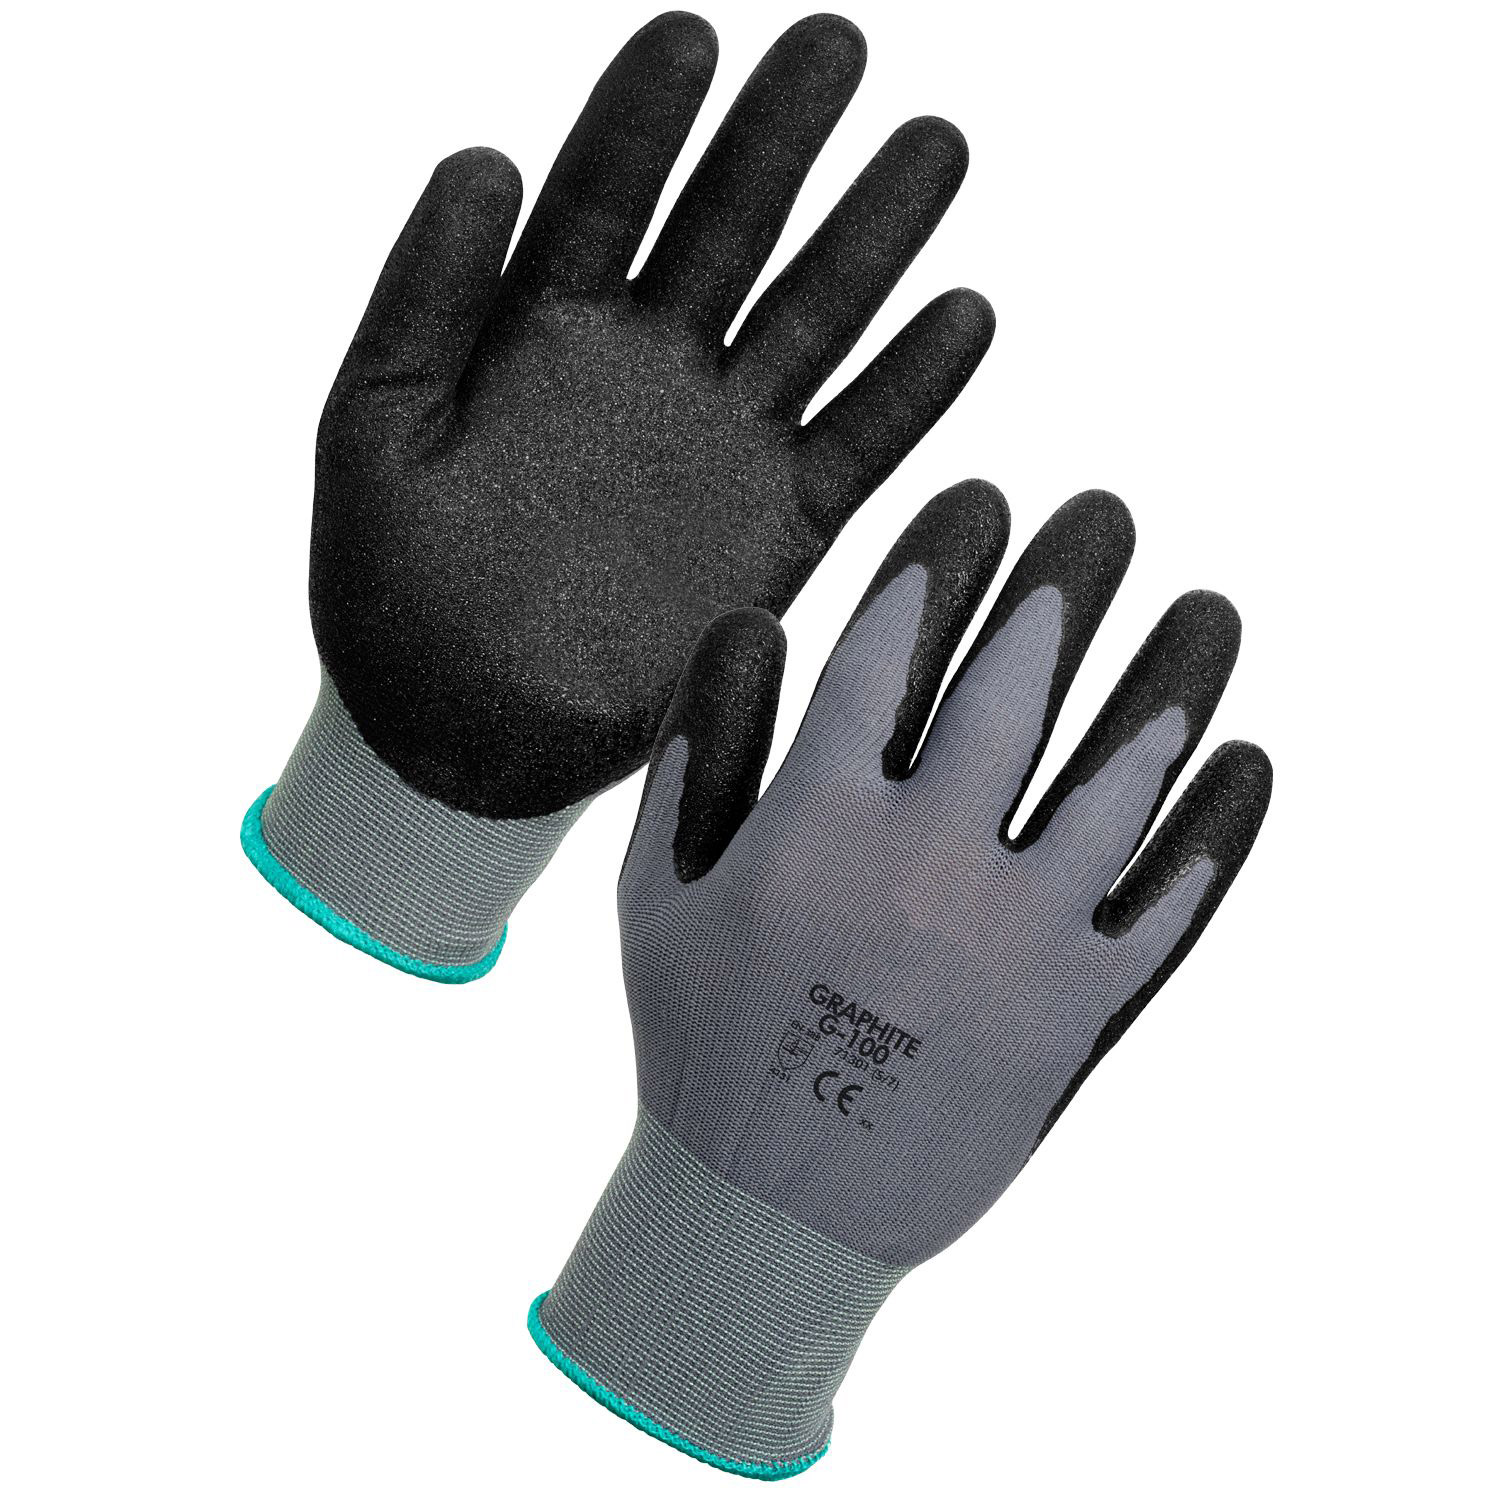 Graphite Abrasion Resistance Gloves with Nitrile Coating